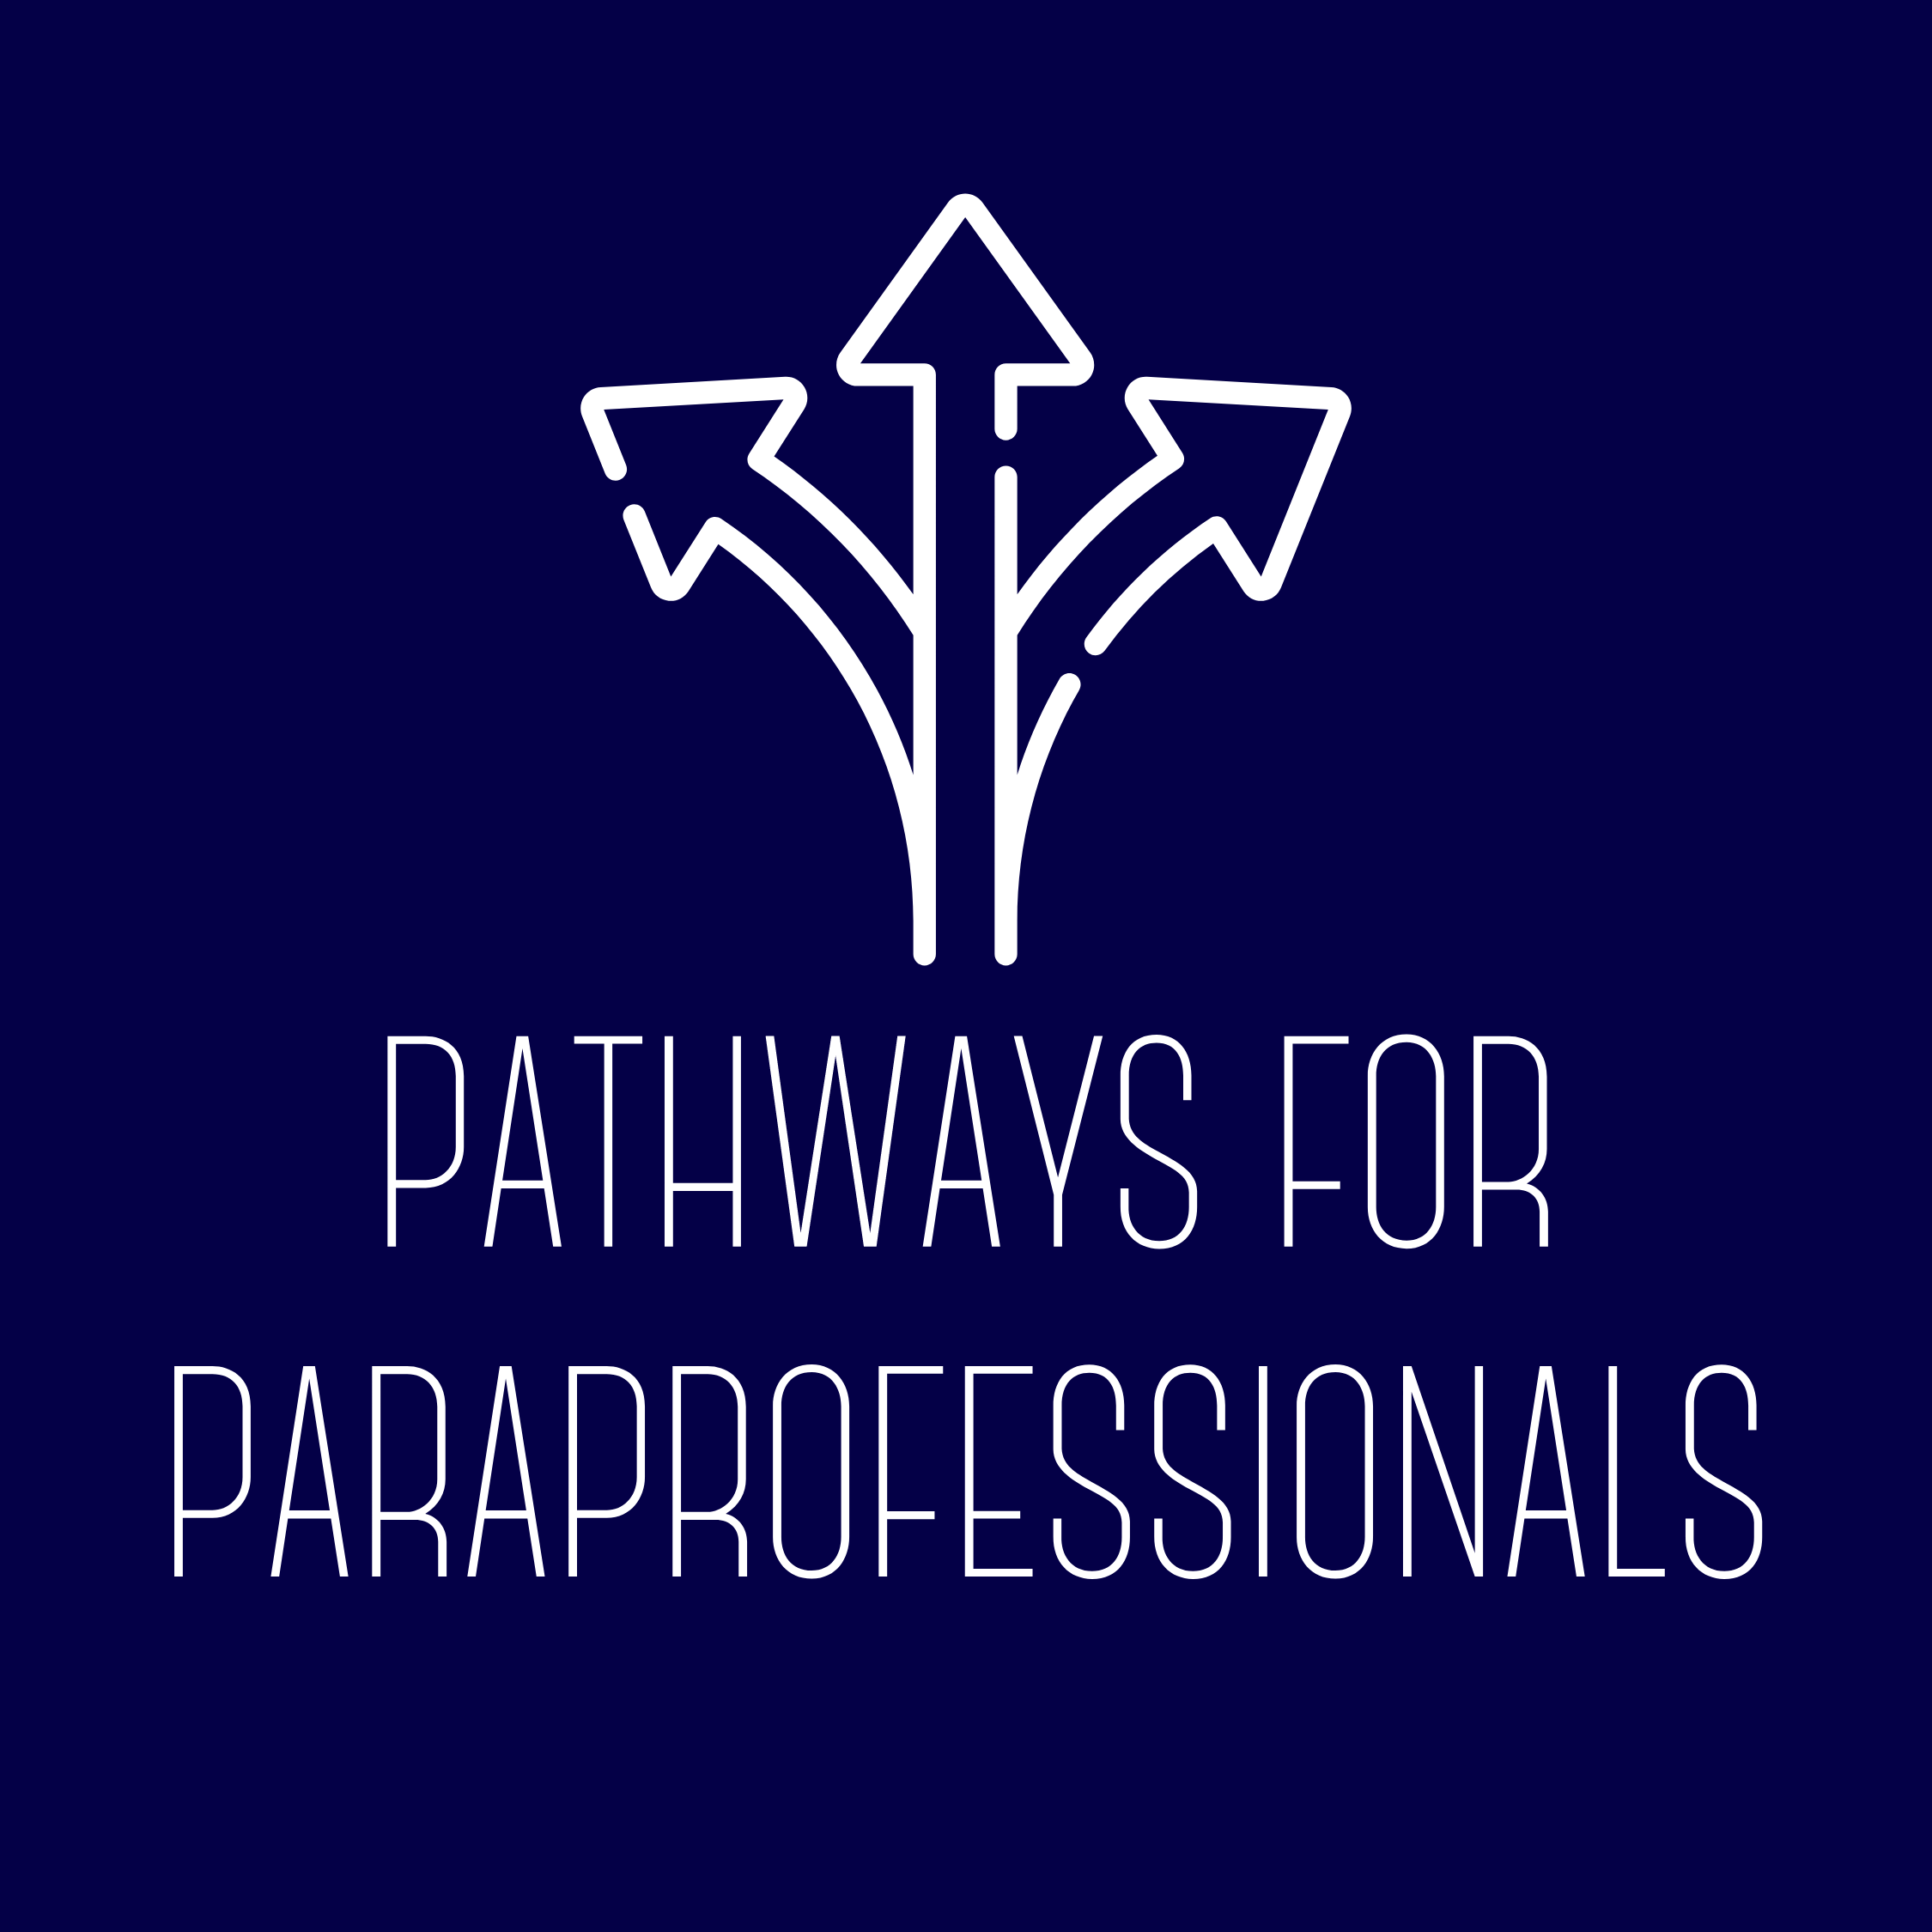 Pathways for Paraprofessionals